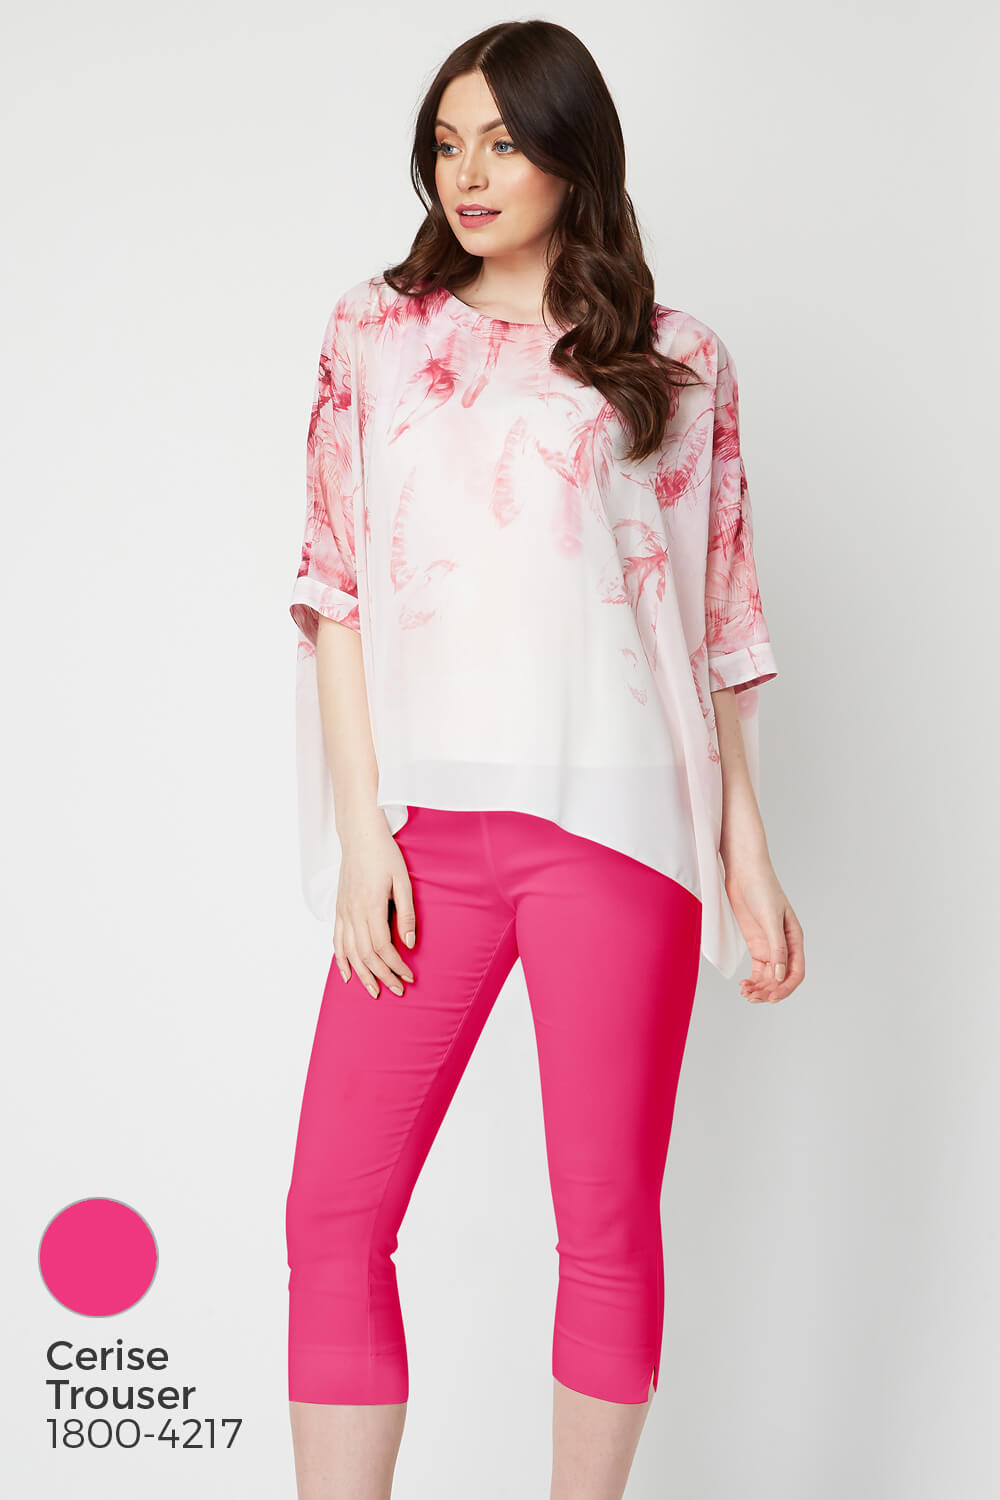 PINK Feather Border Print Overlay Top, Image 6 of 8